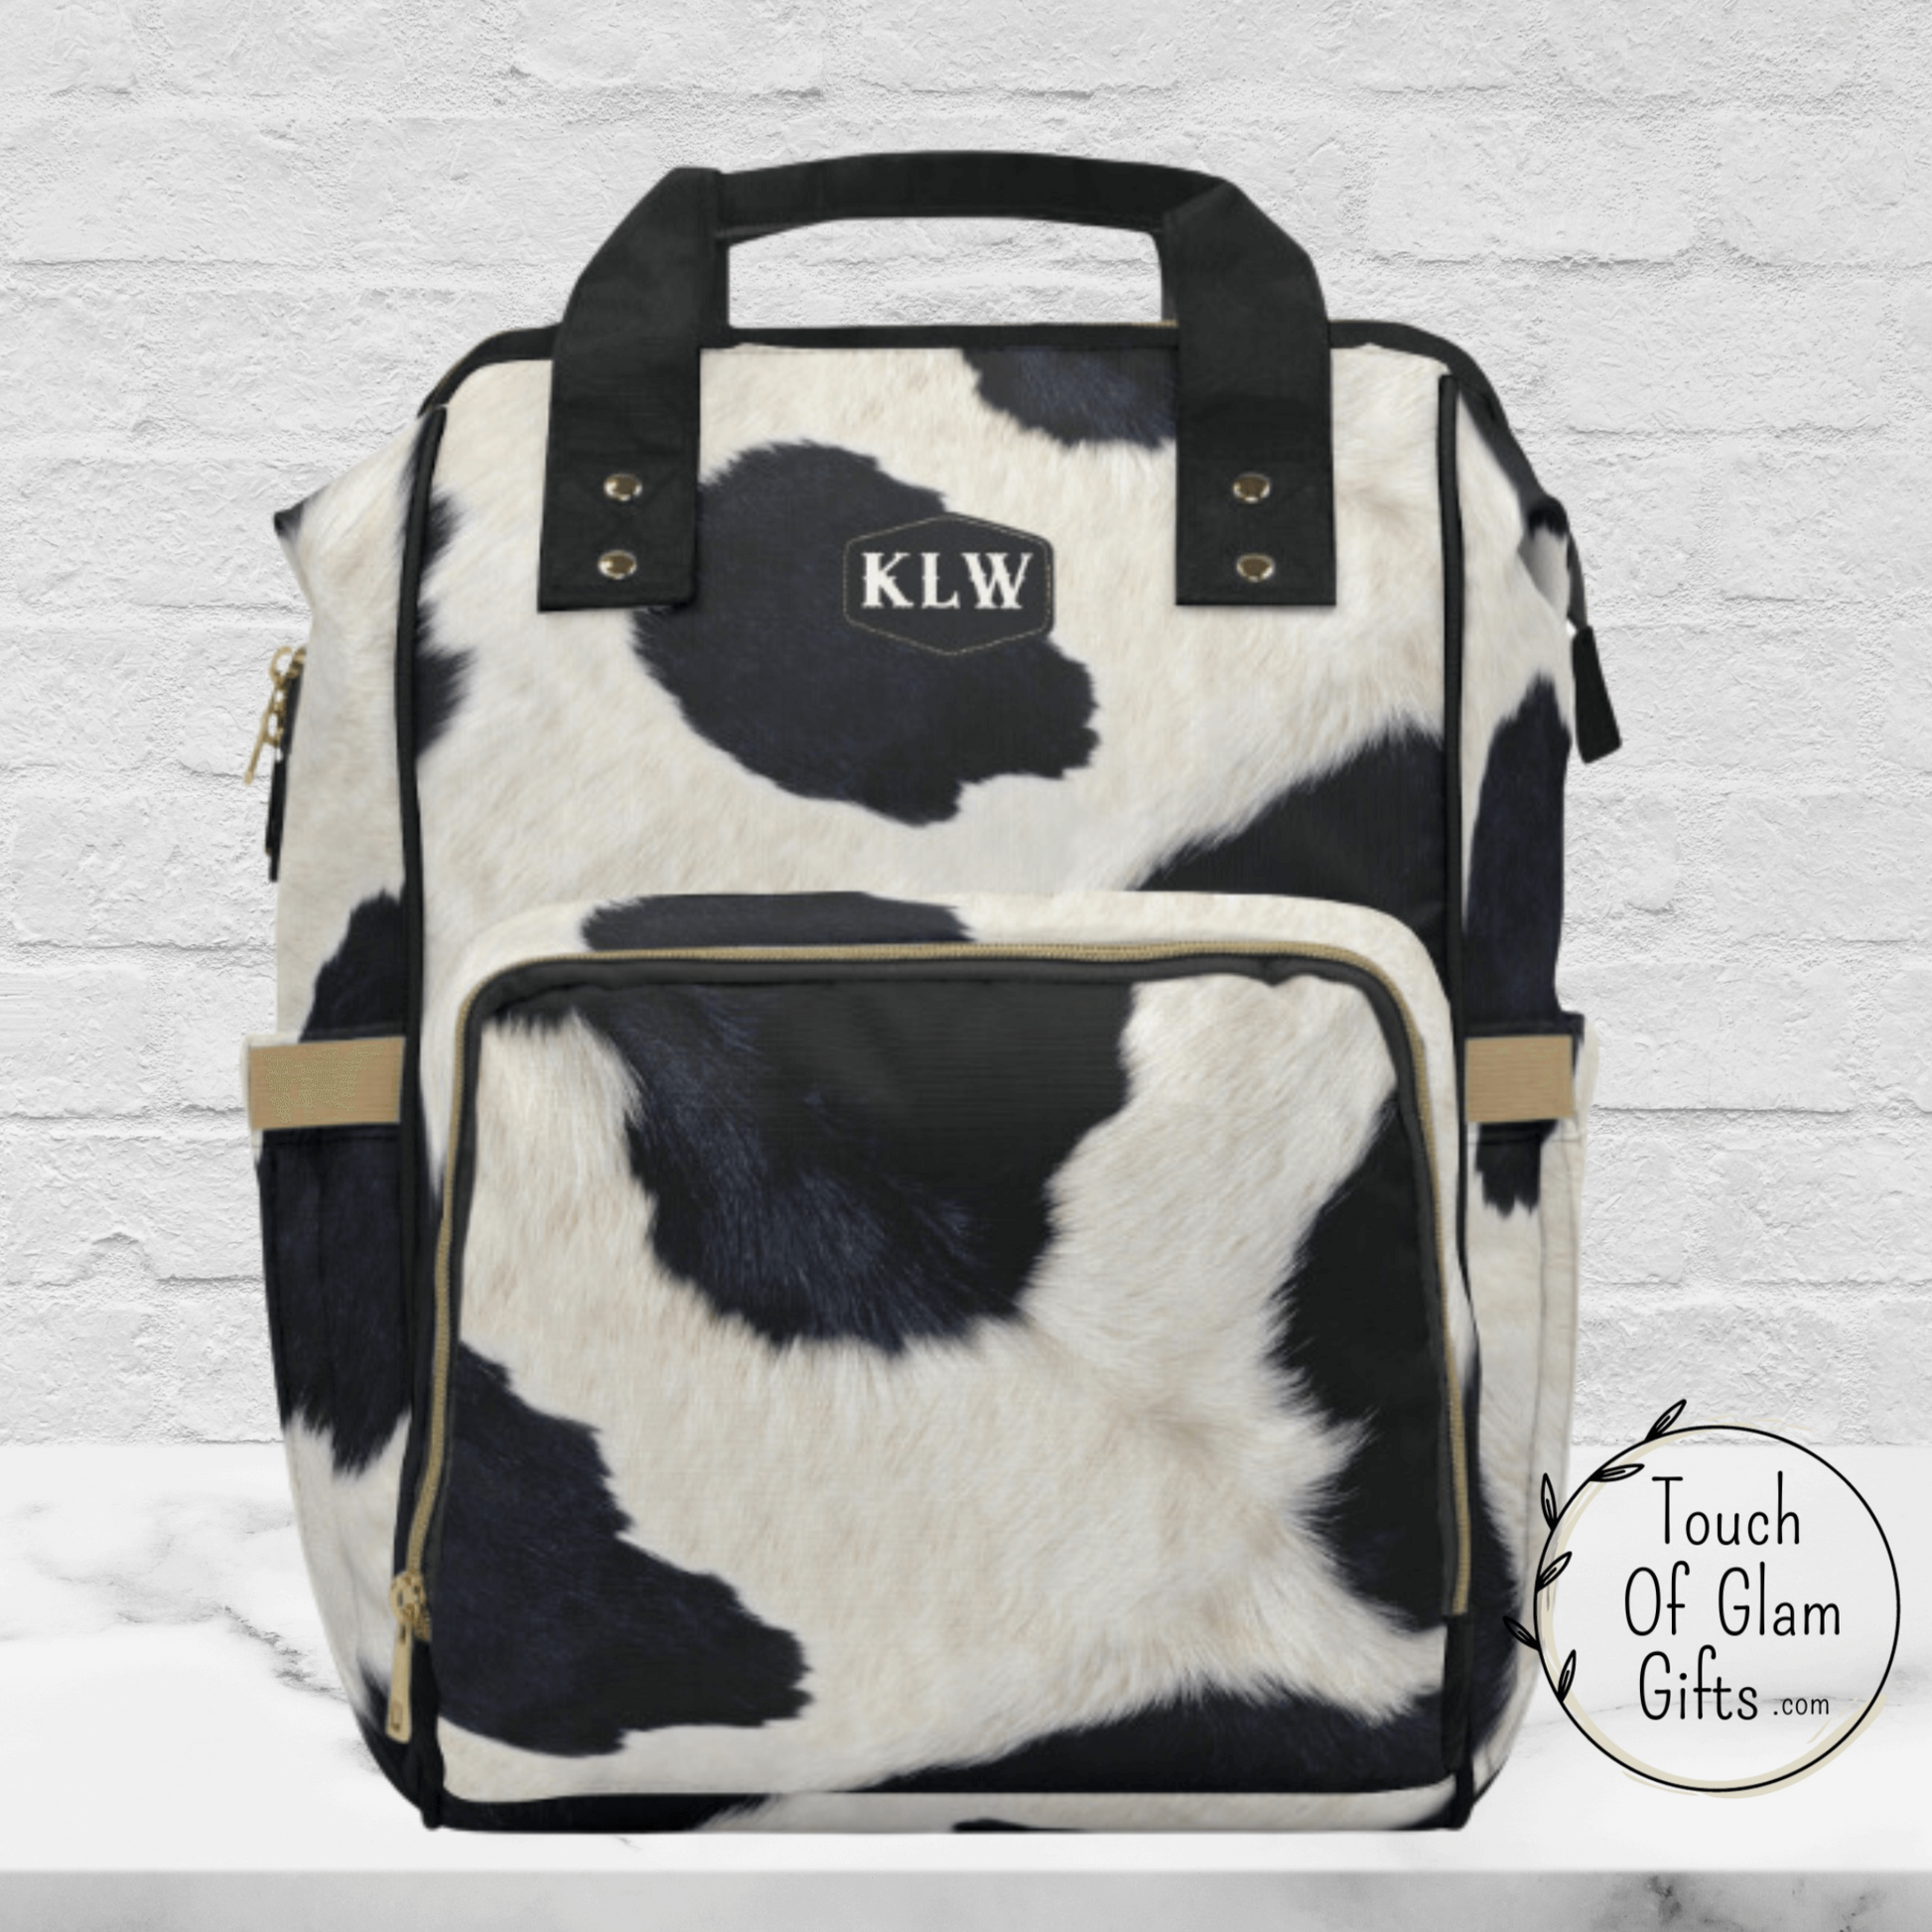 Our black and white diaper backpack can be personalized with up to 3 initials. This diaper backpack is a great personalized gift for a baby shower gift and mom to be.